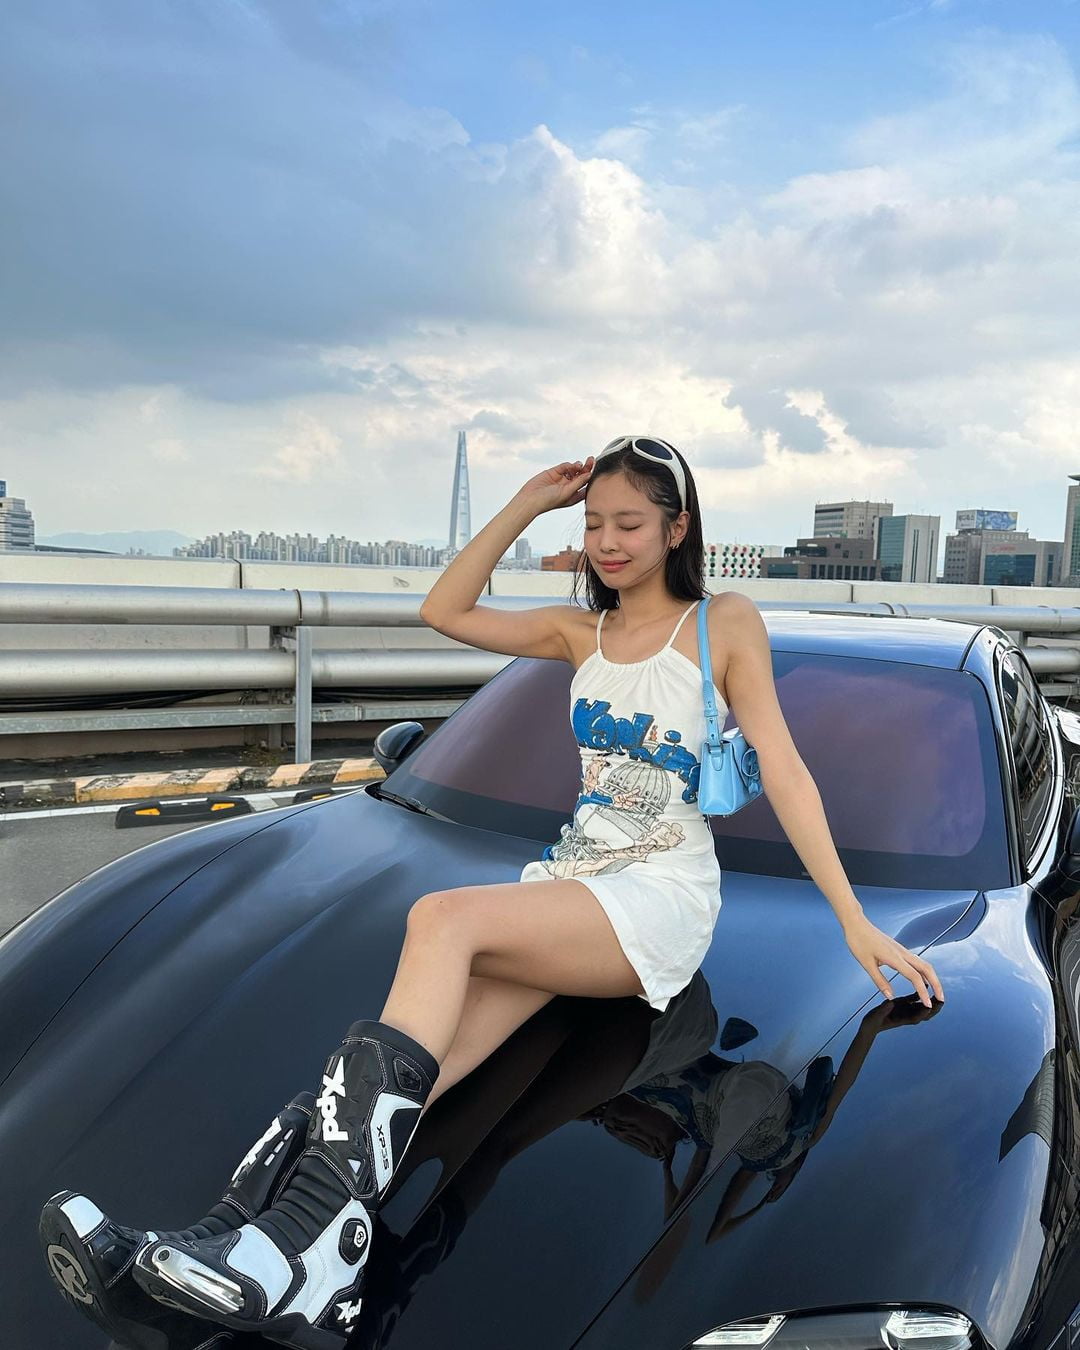 “I make a lot of money, it’s nice to live” Le Seraphim → ‘Han River View’ Sunny, ‘Supercar’ Jenny